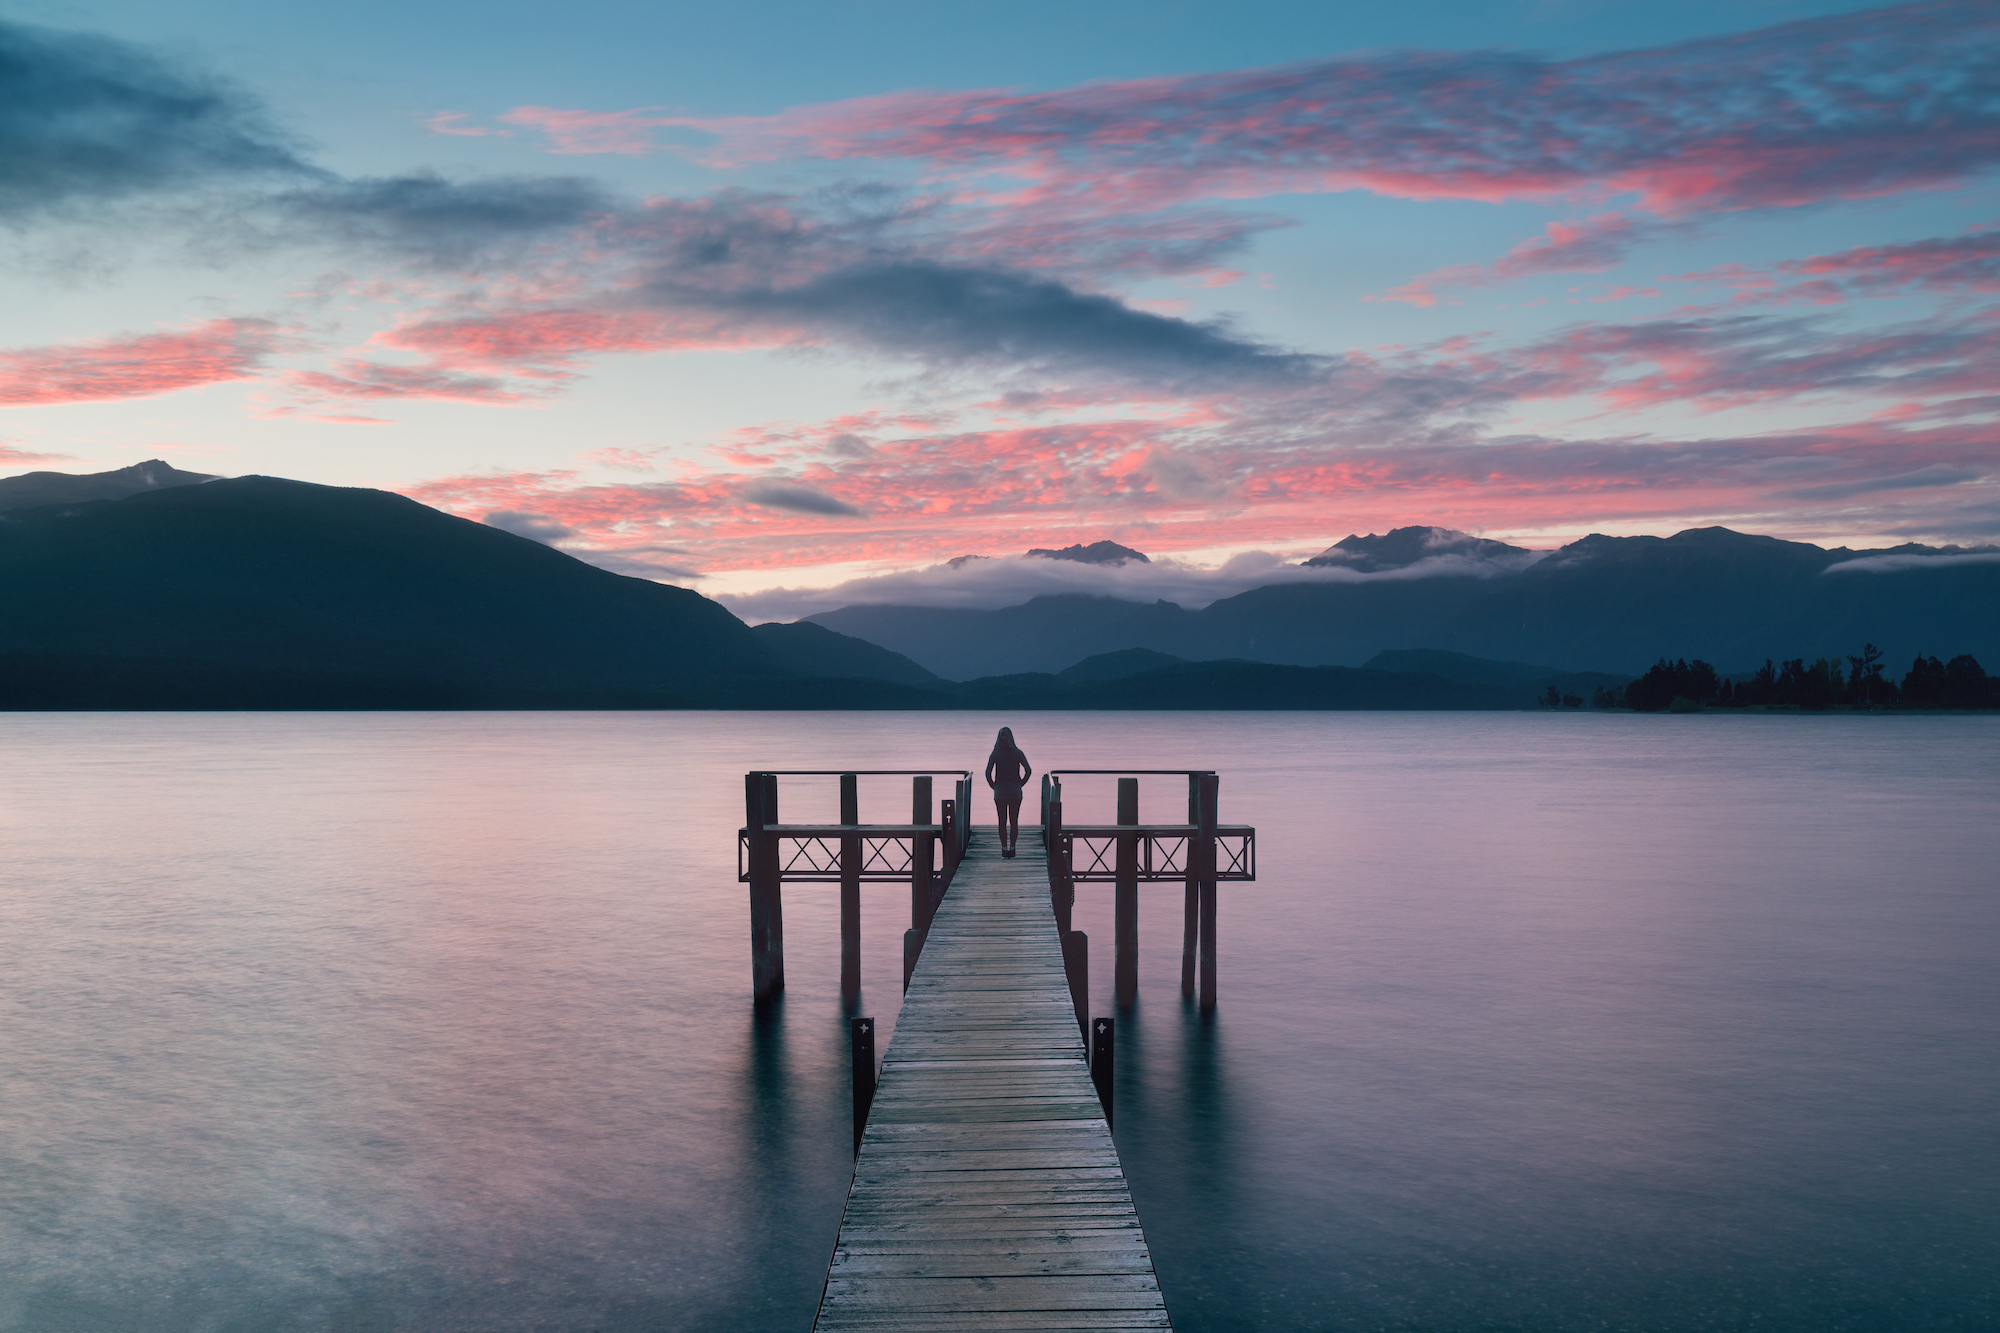 Dock going into the lake at sunset with a pink and blue sky